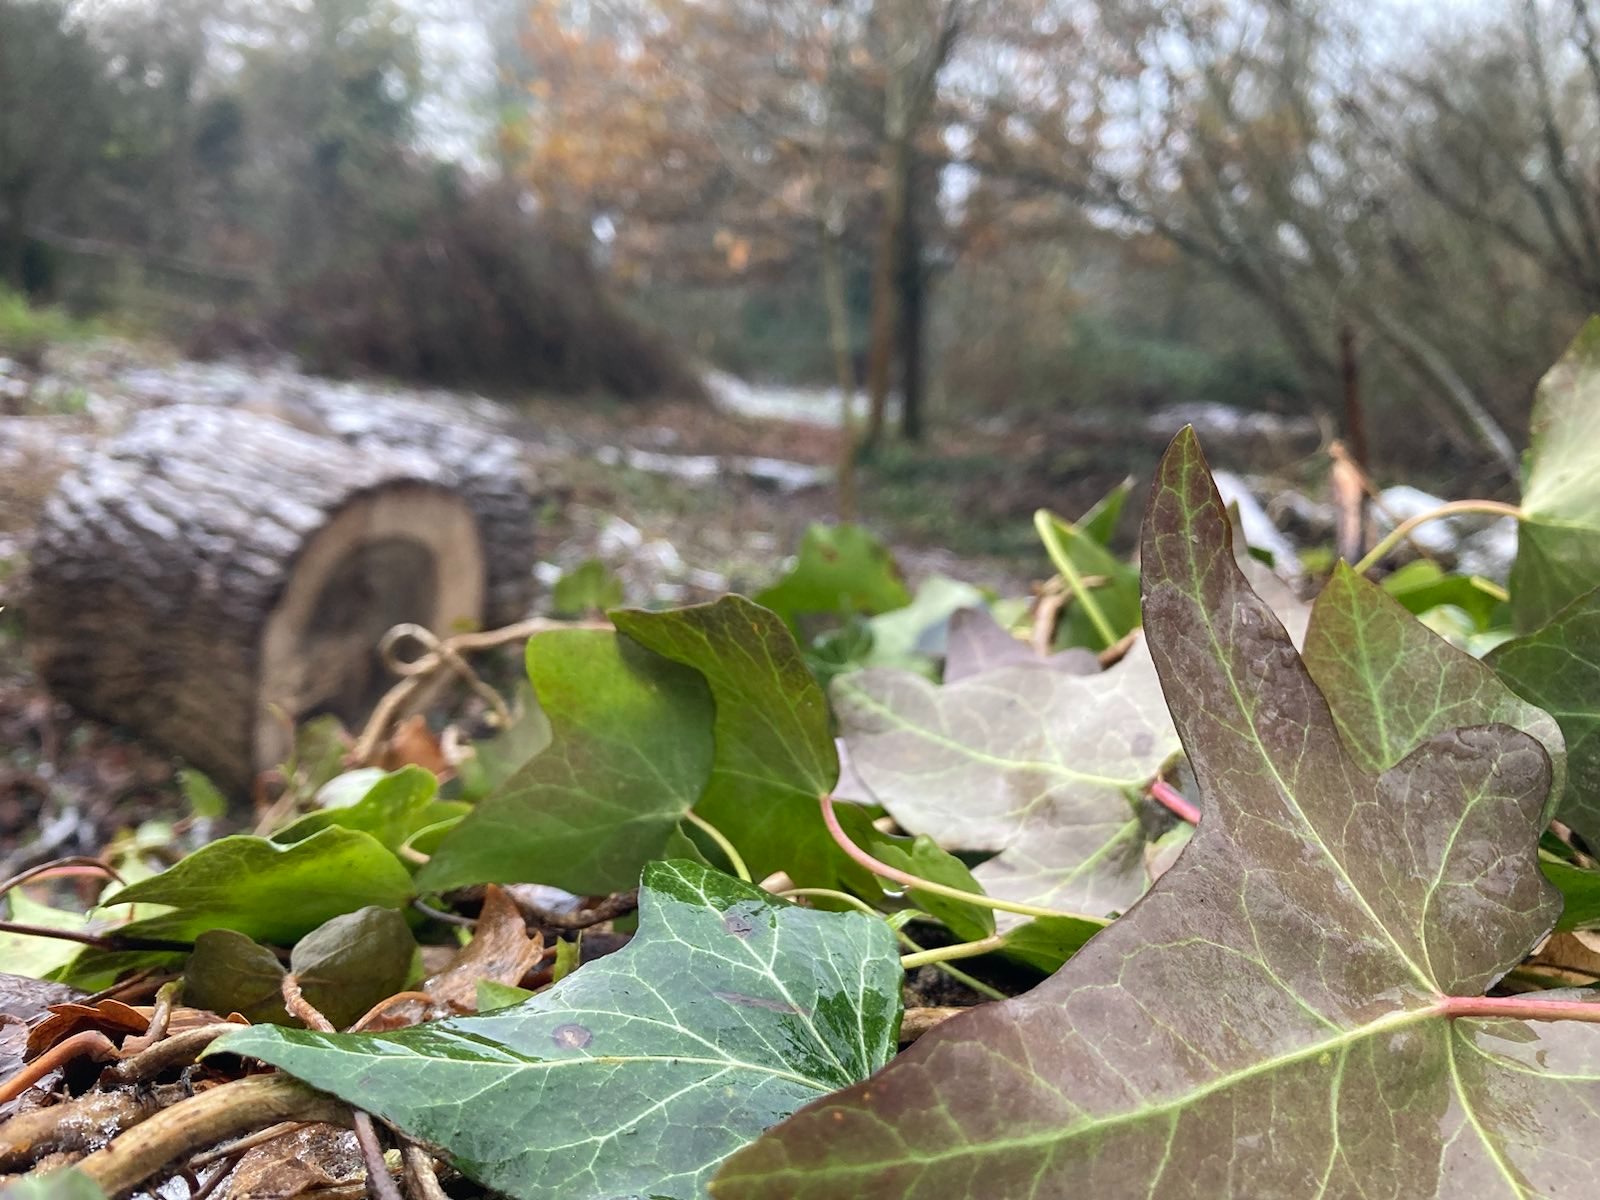 Ivy in the foreground, with part of a felled oak and woodland in the background.